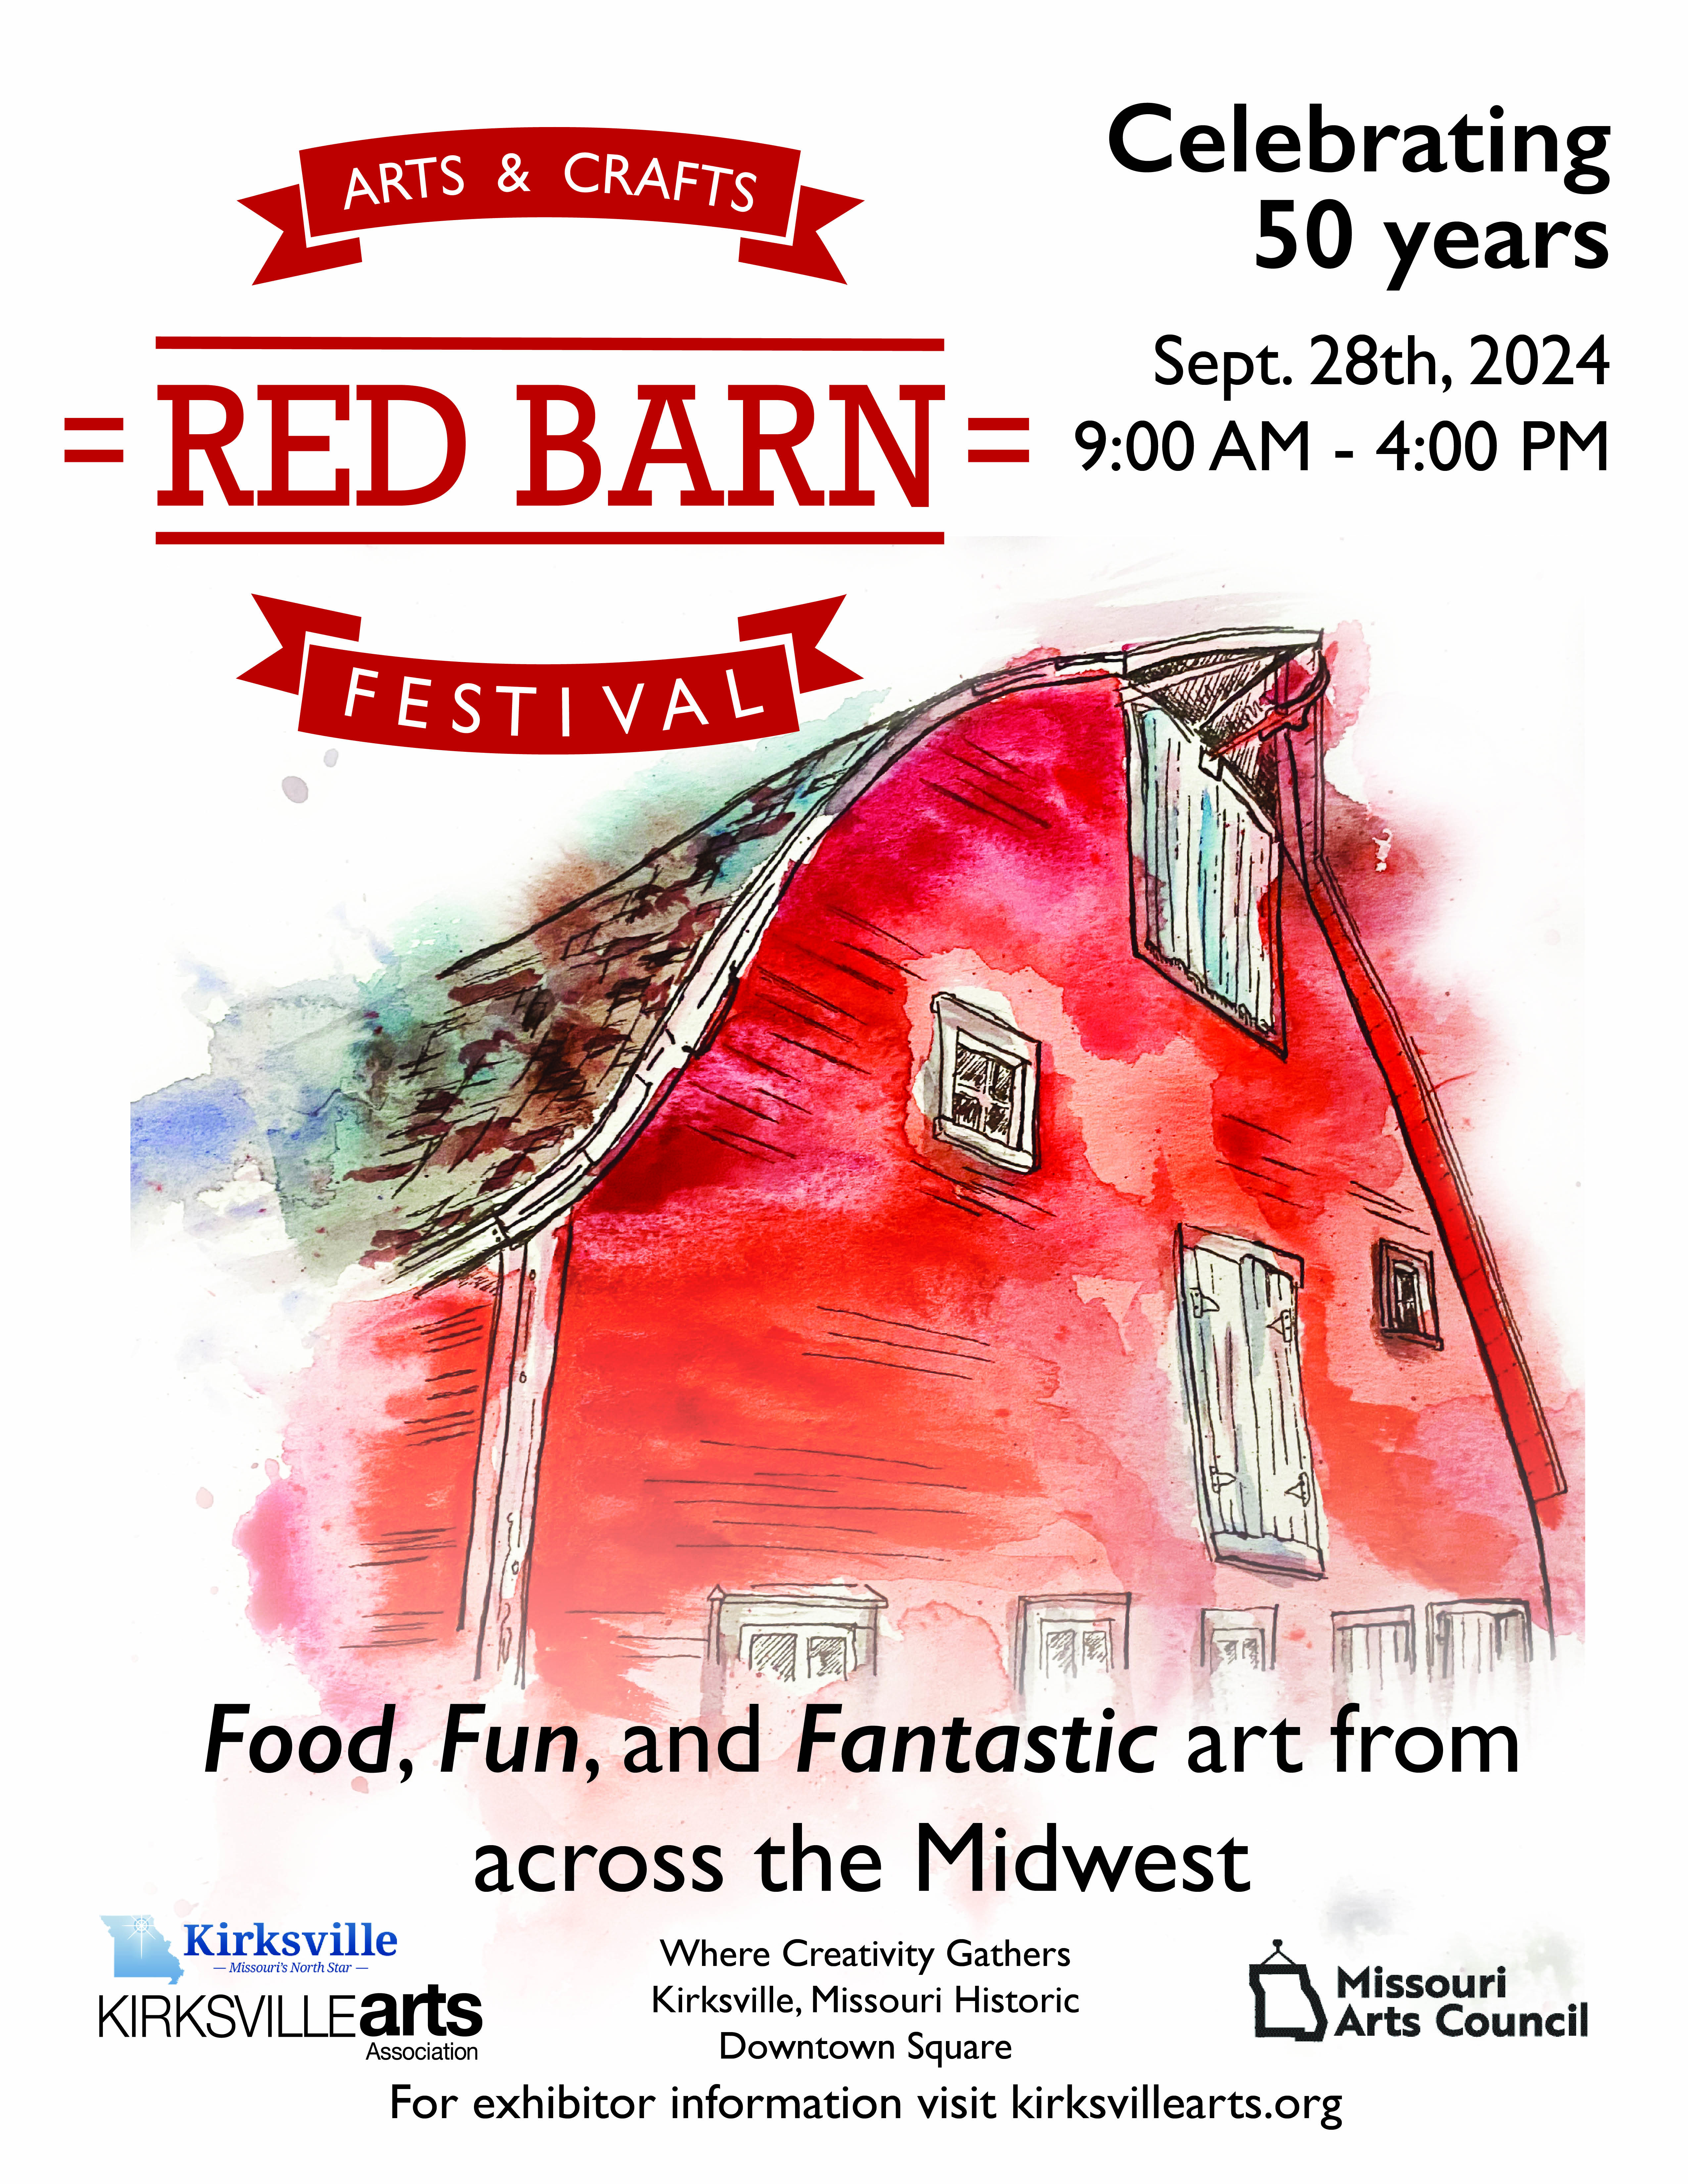 Check more about Red Barn Arts & Crafts Festival